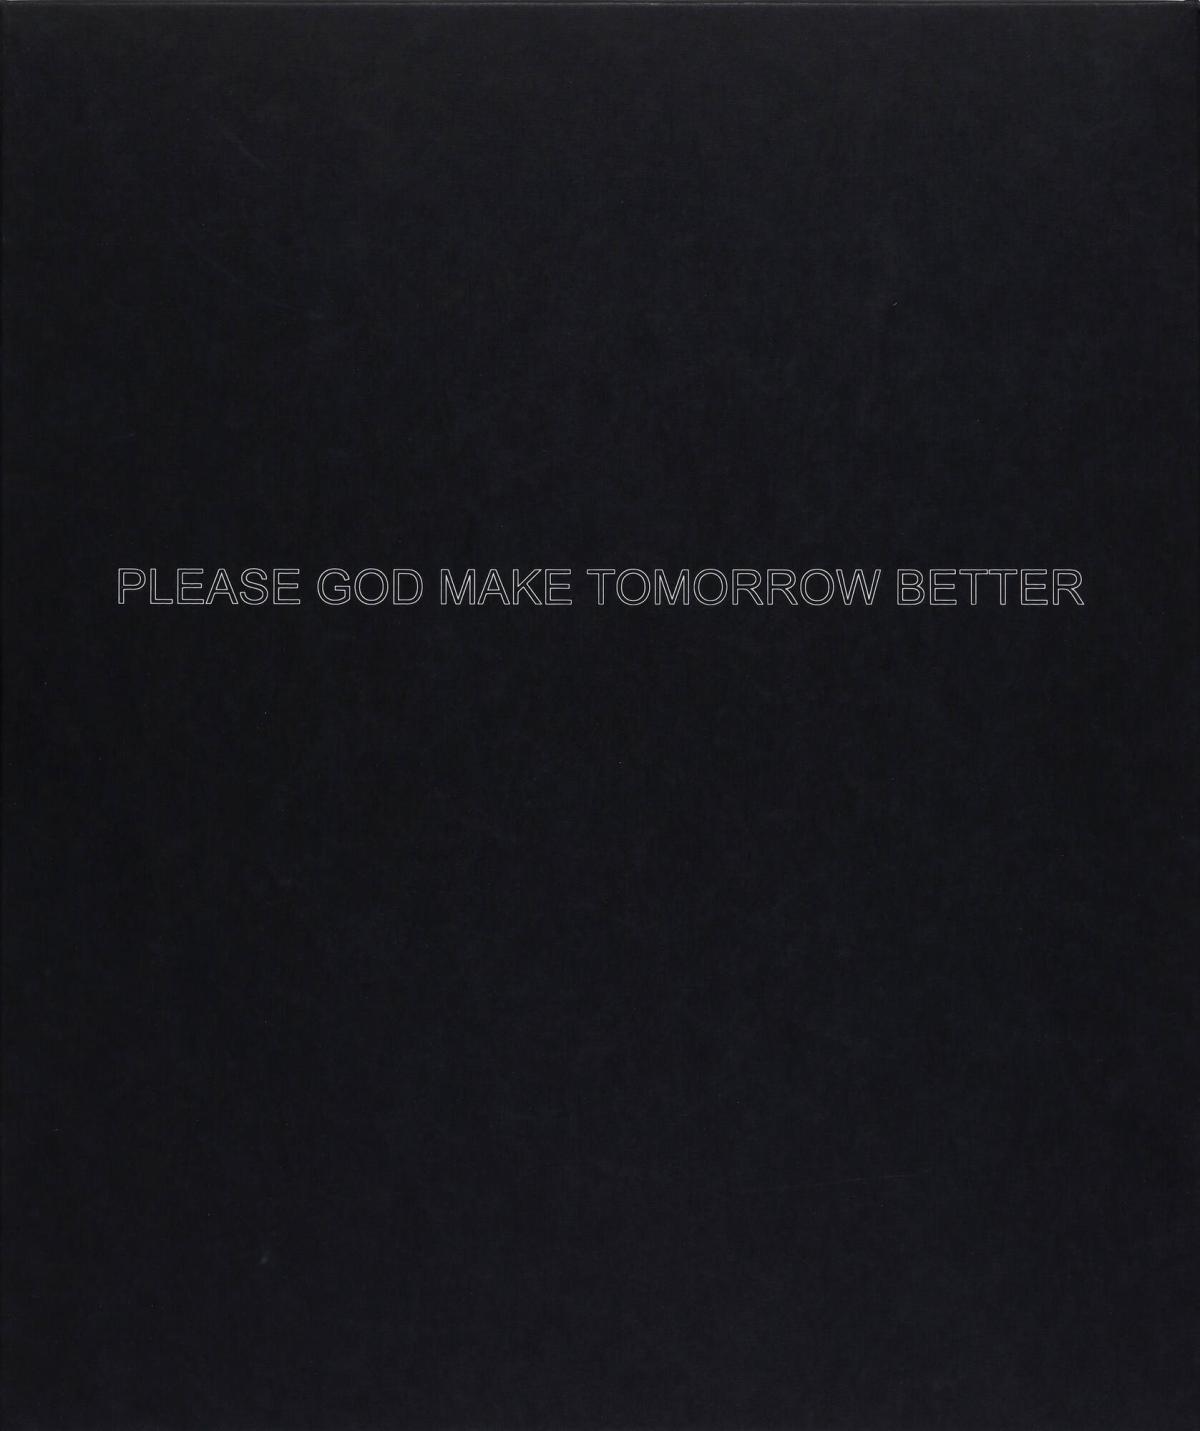 Please God Make Tomorrow Better, from Artists Space 1st Annual Edition Portfolio